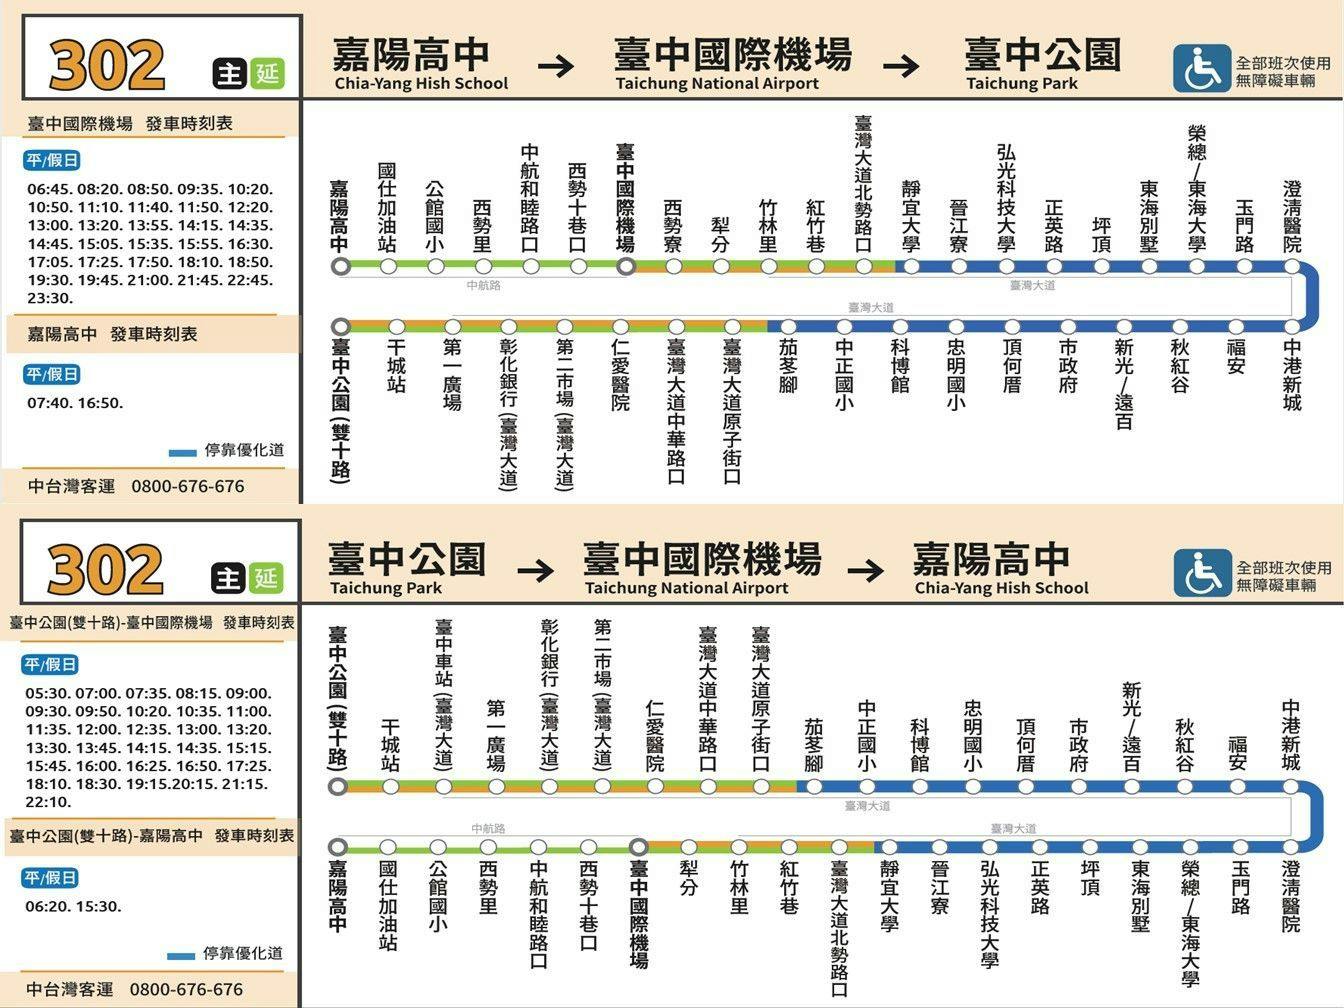 302Route Map-台中 Bus